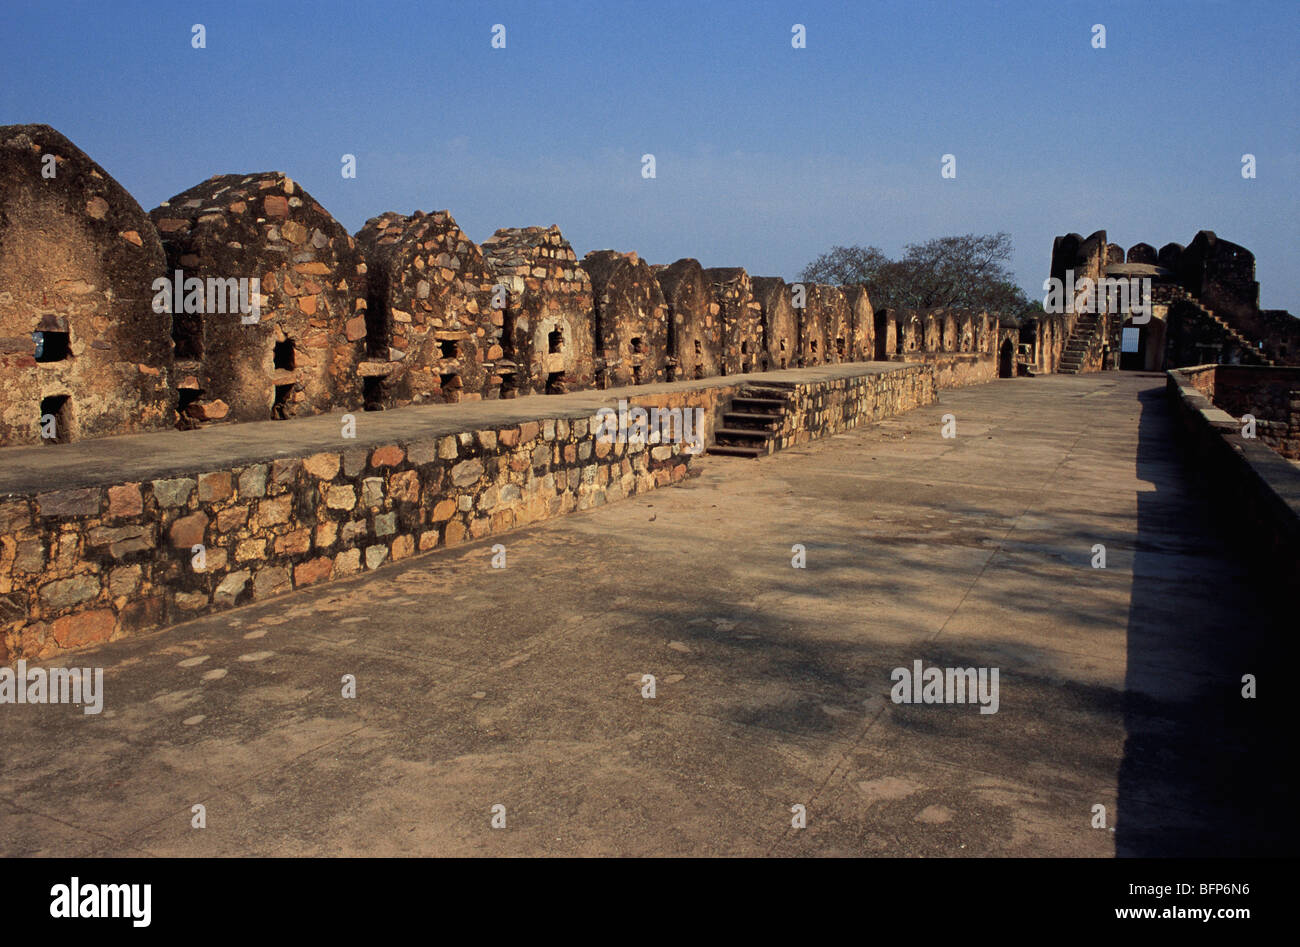 Jhansi Attractions - Photo Gallery